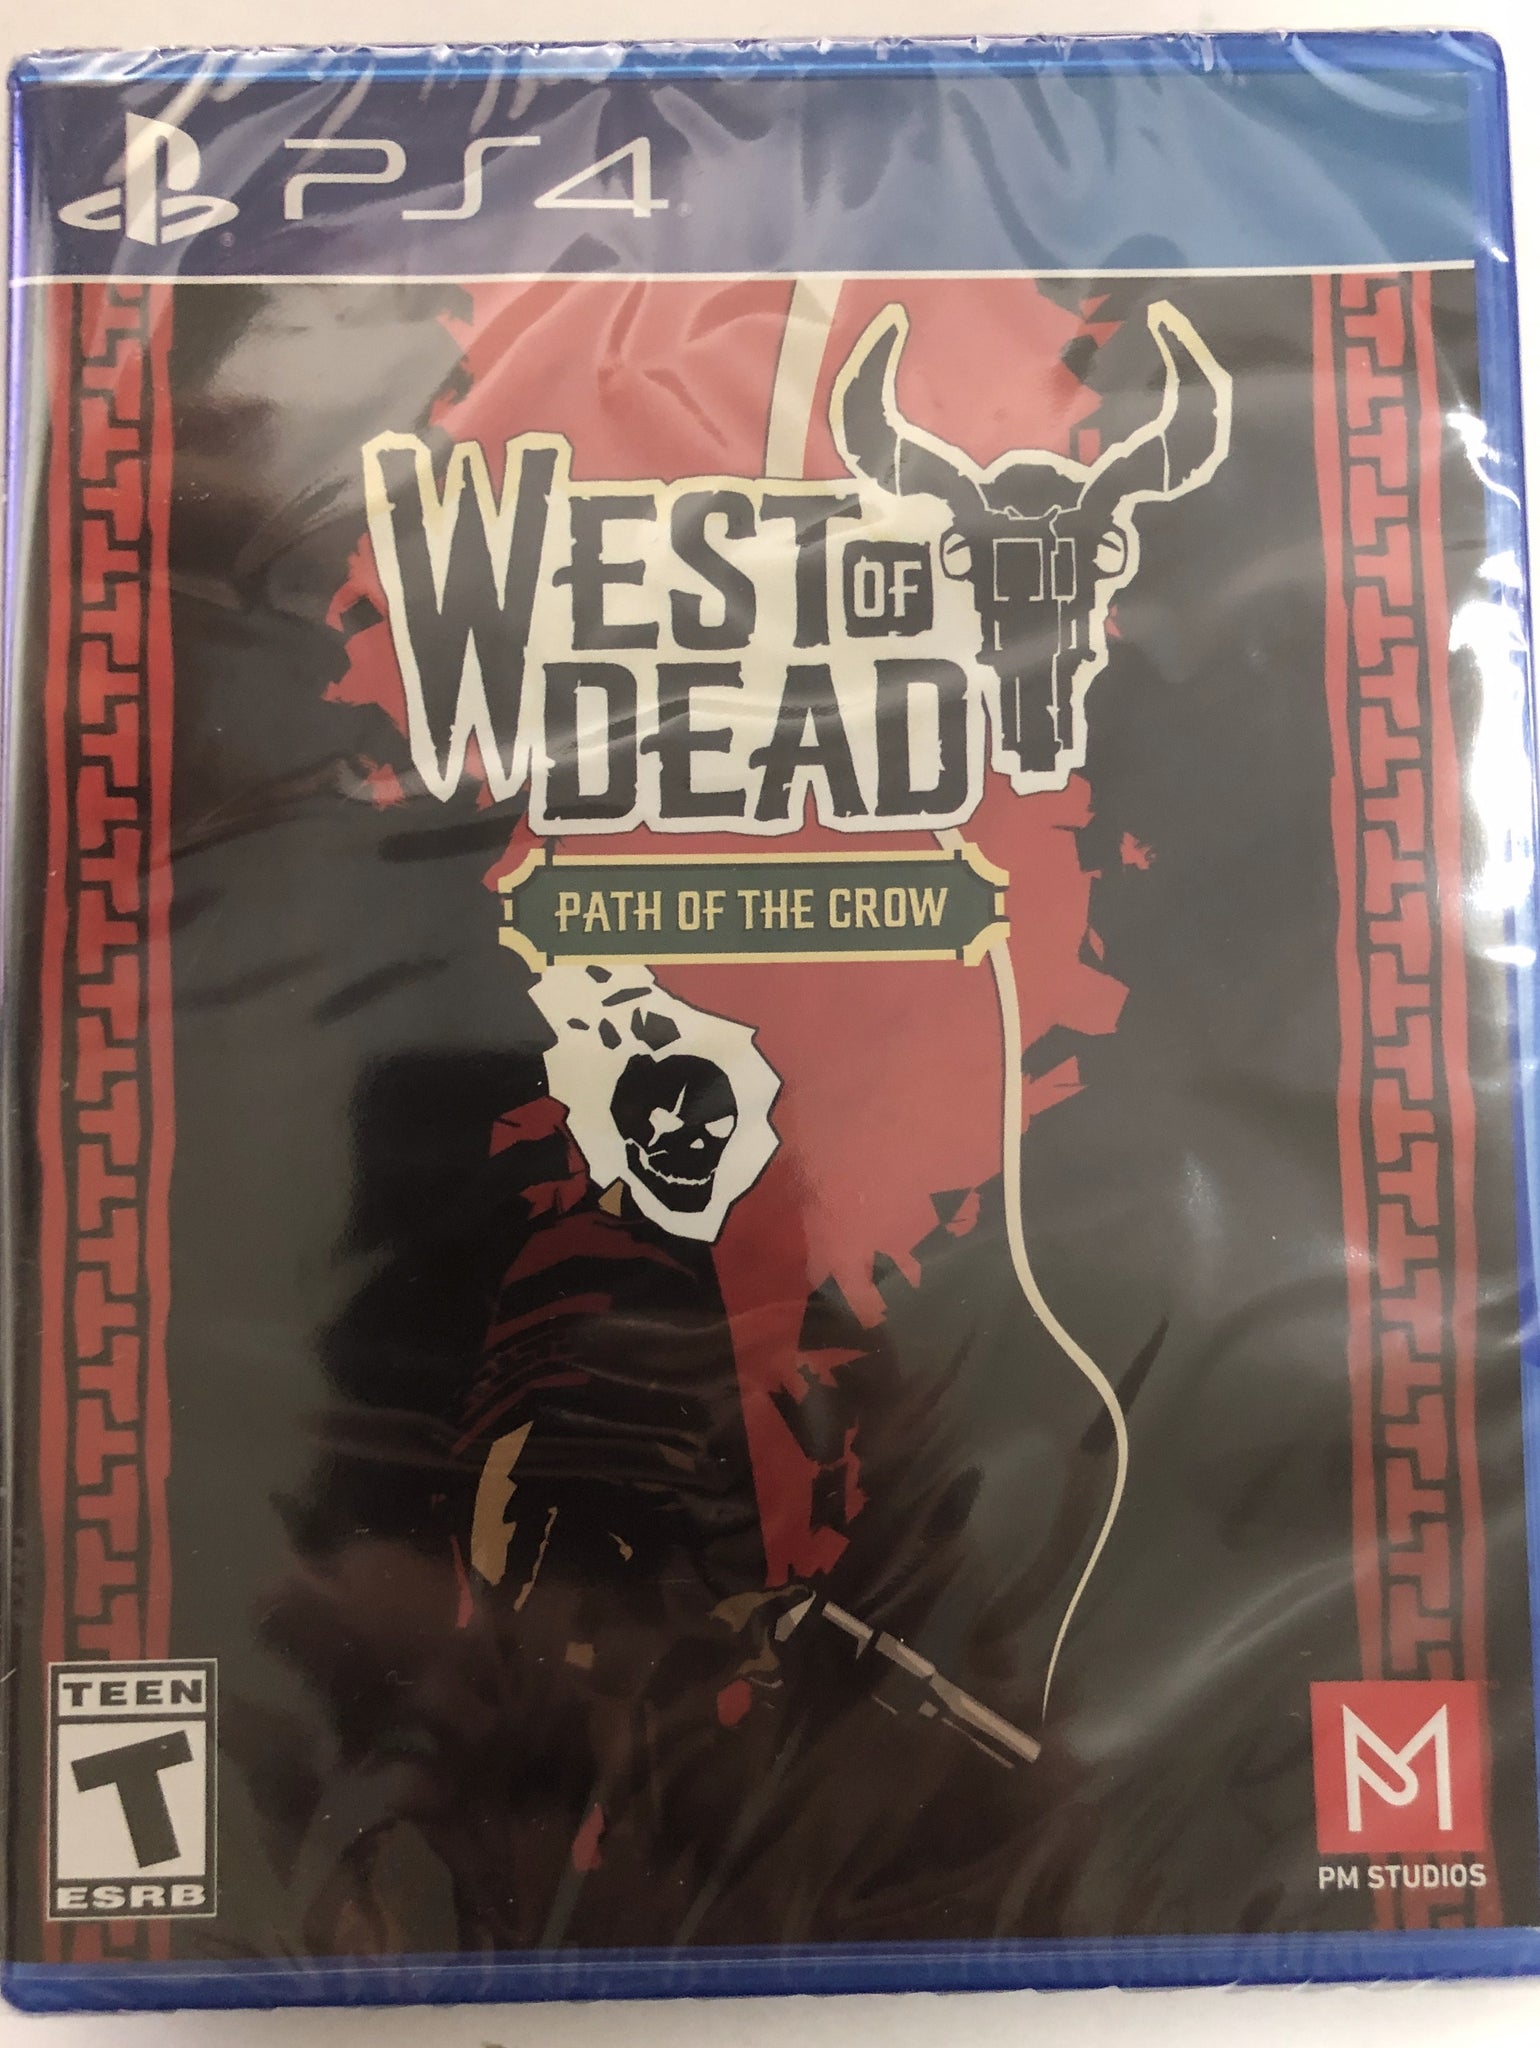 PS4 "West of Dead: Path of the Crow"